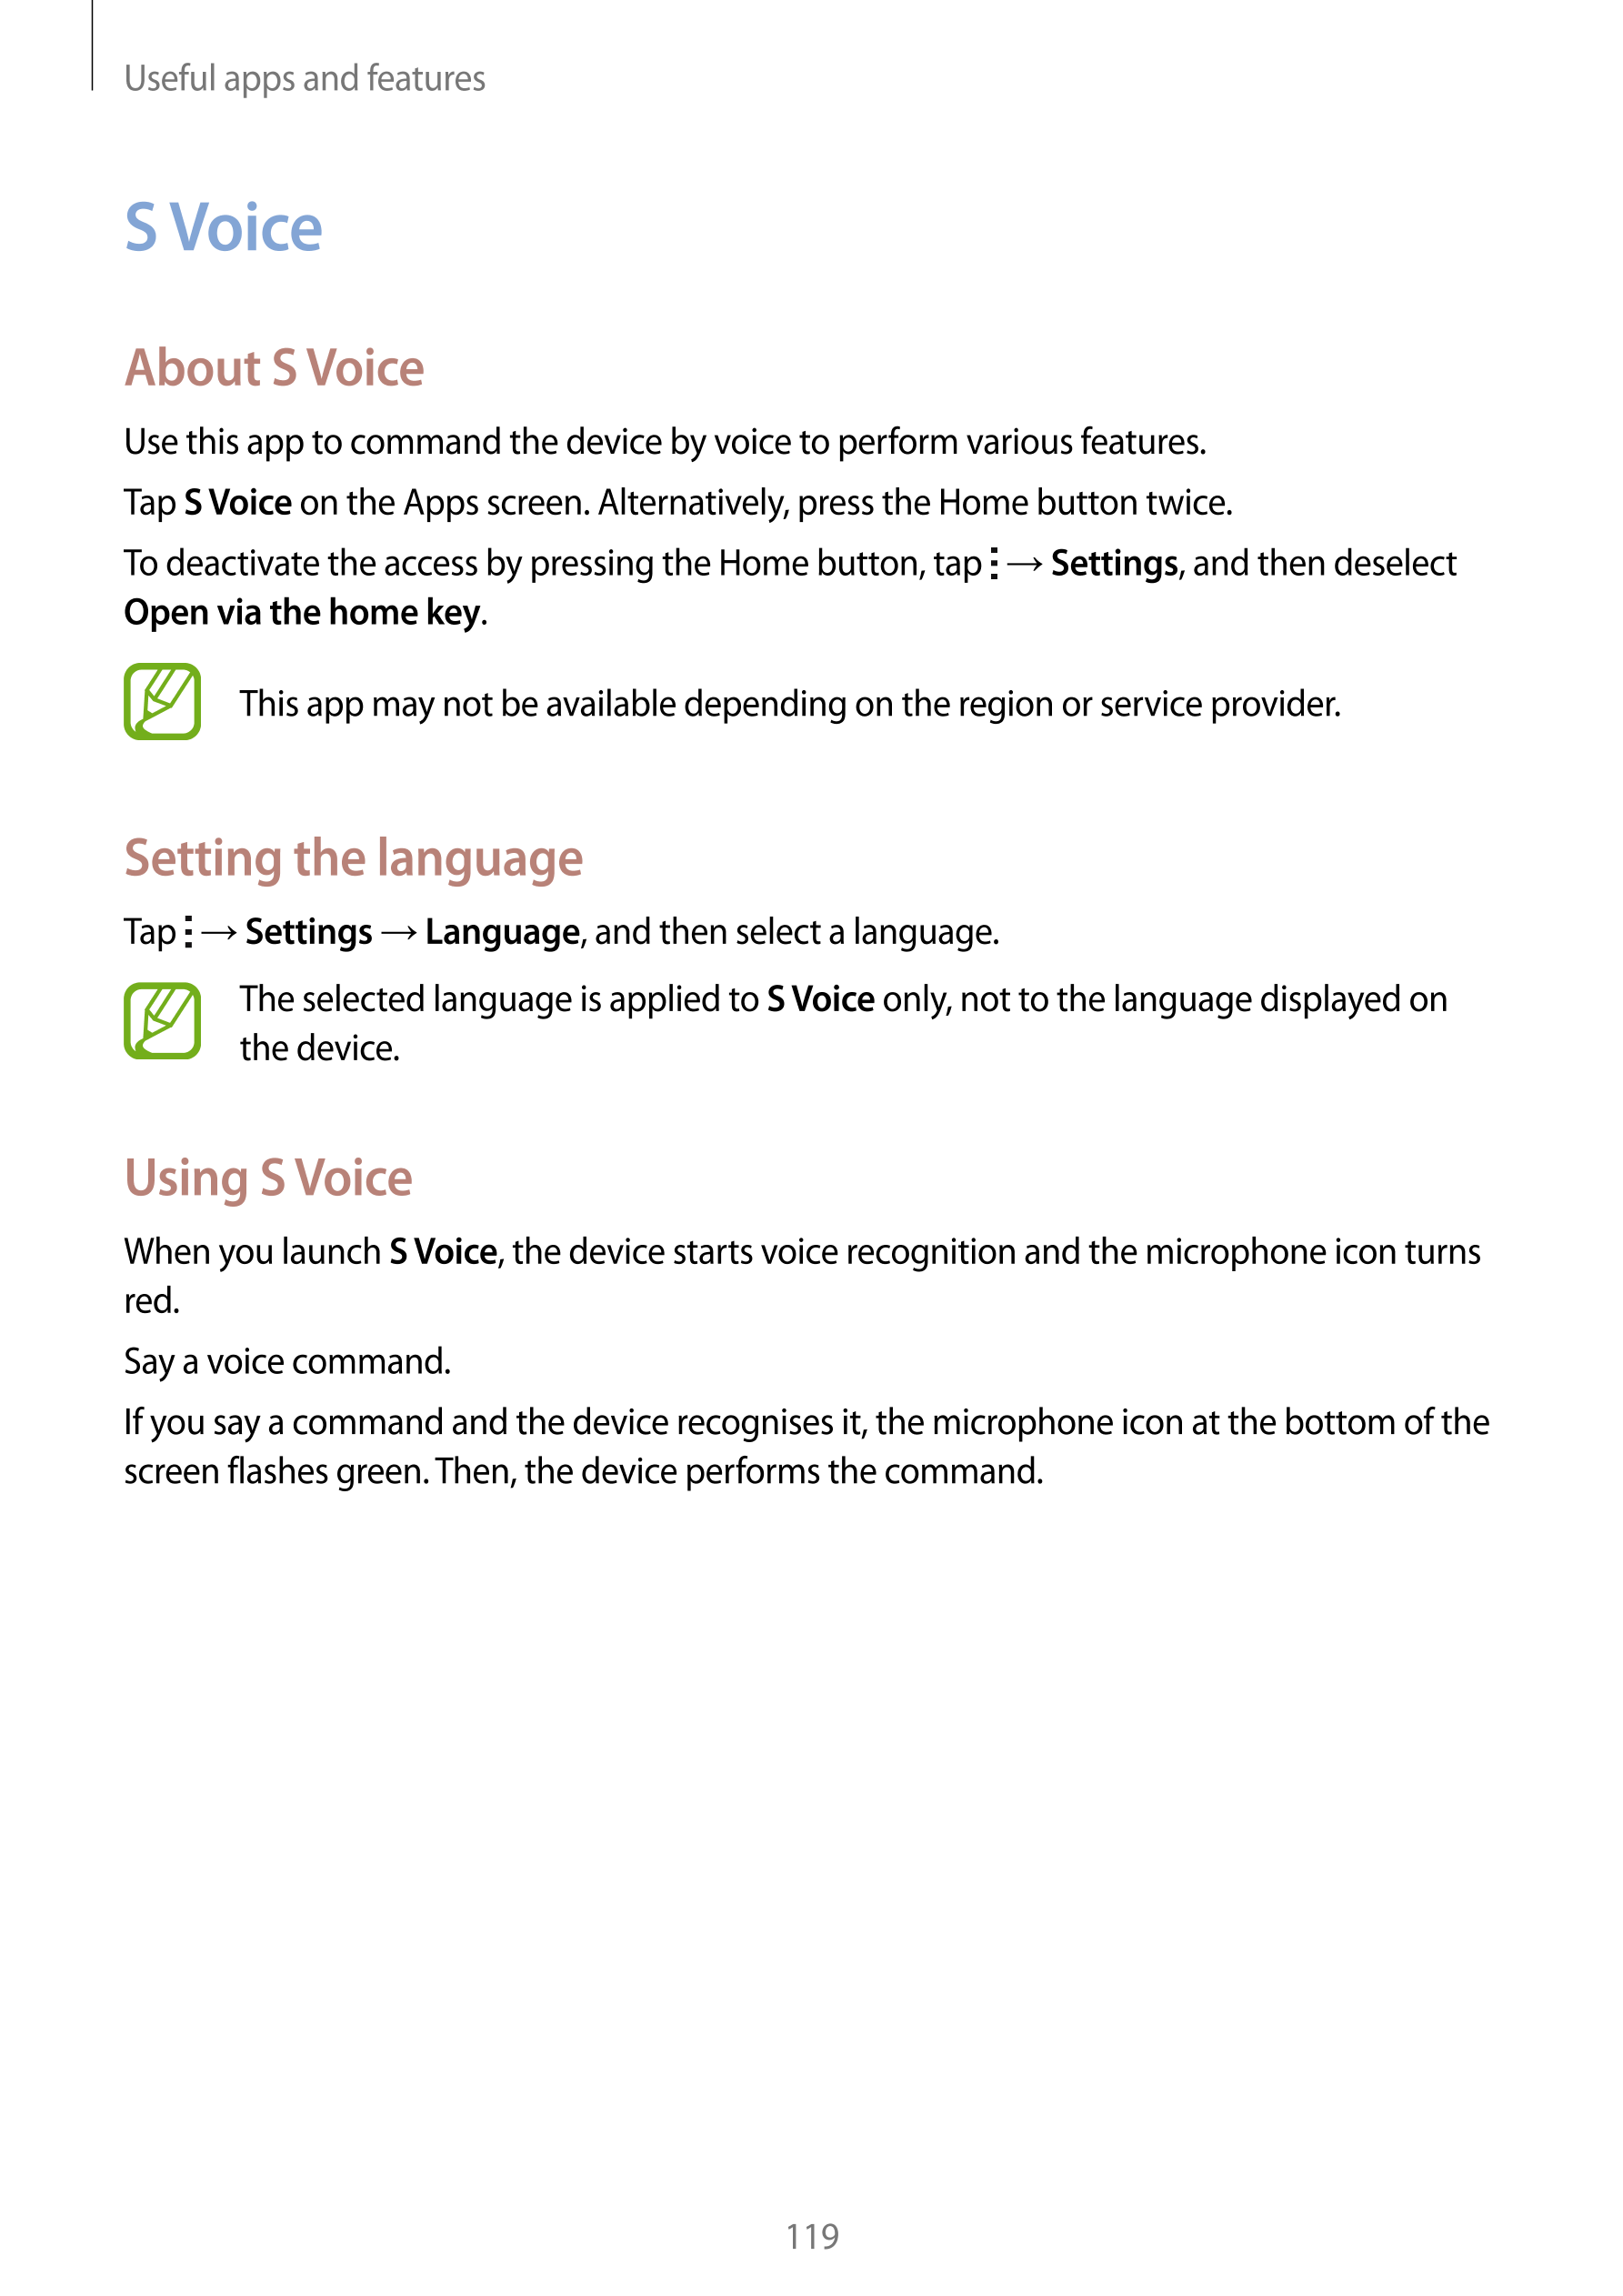 Useful apps and features
S Voice
About S Voice
Use this app to command the device by voice to perform various features.
Tap  S V